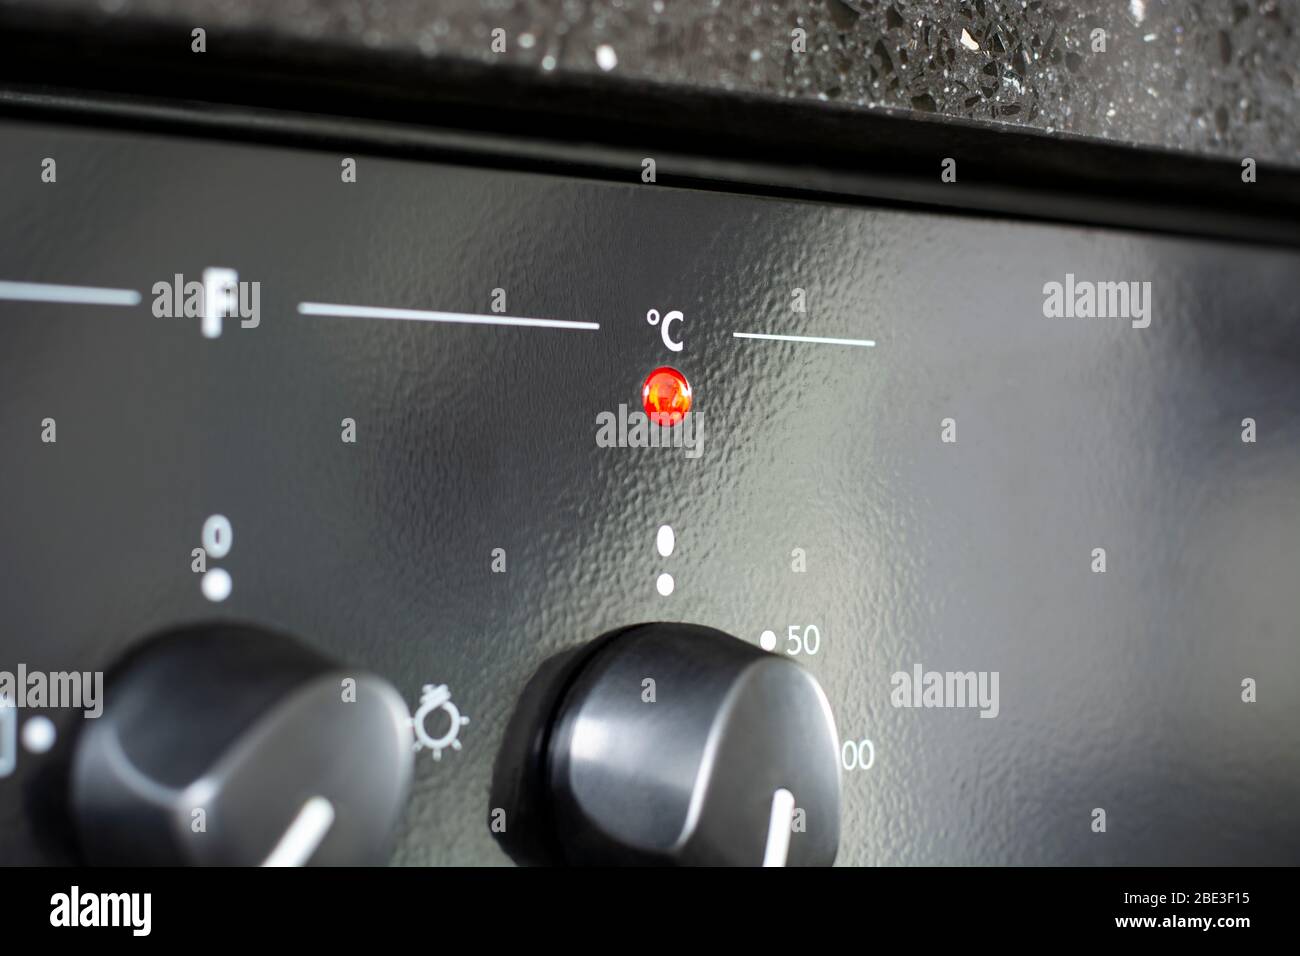 Celsius with red indicator light. Heating up the oven in kitchen Stock Photo